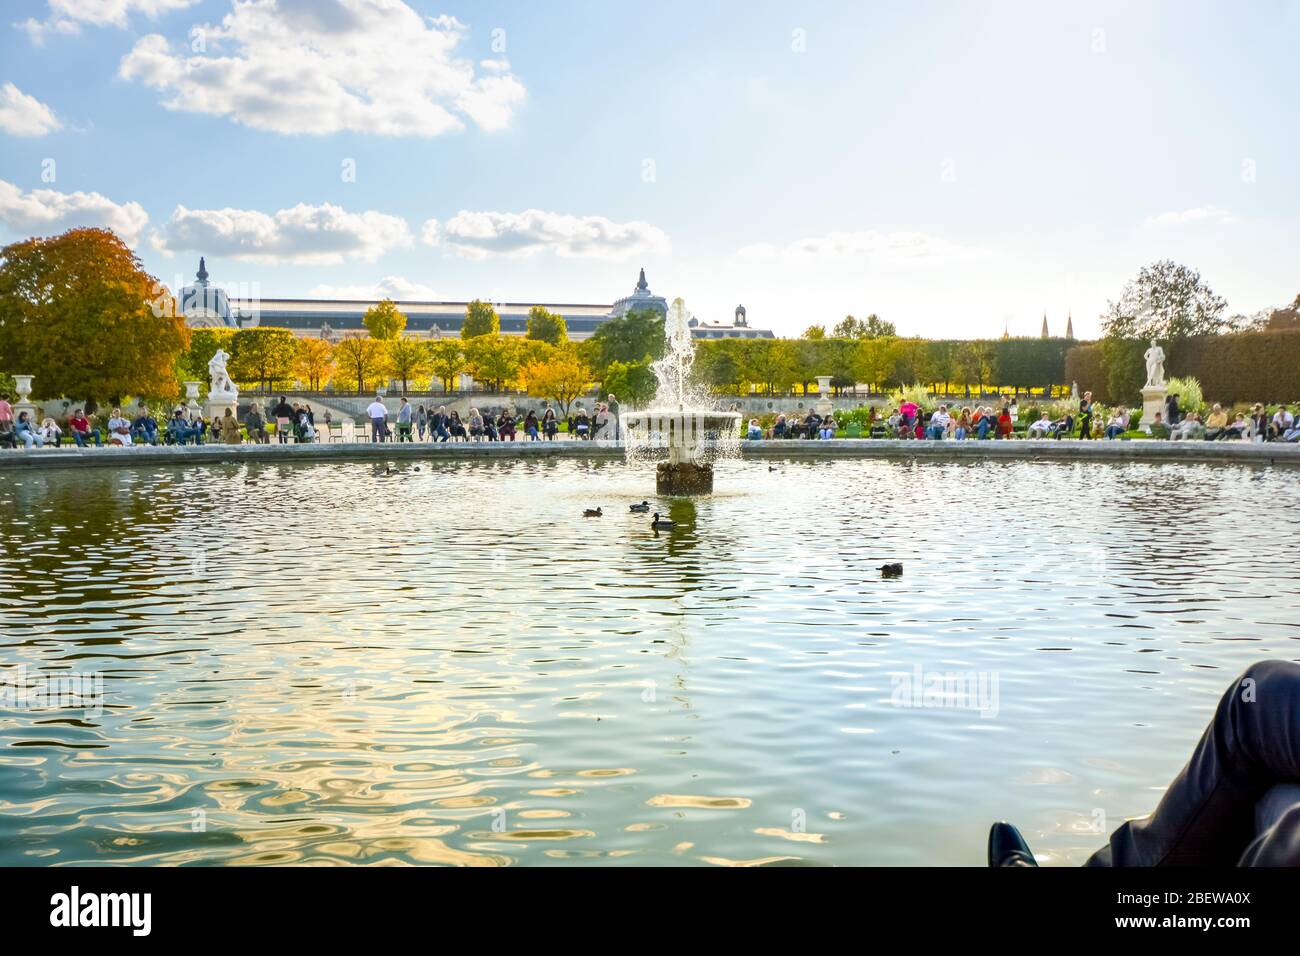 Parisians and tourists enjoy an afternoon at the grand bassin rond, the large water fountain pond at the Tuileries Garden in Paris France Stock Photo